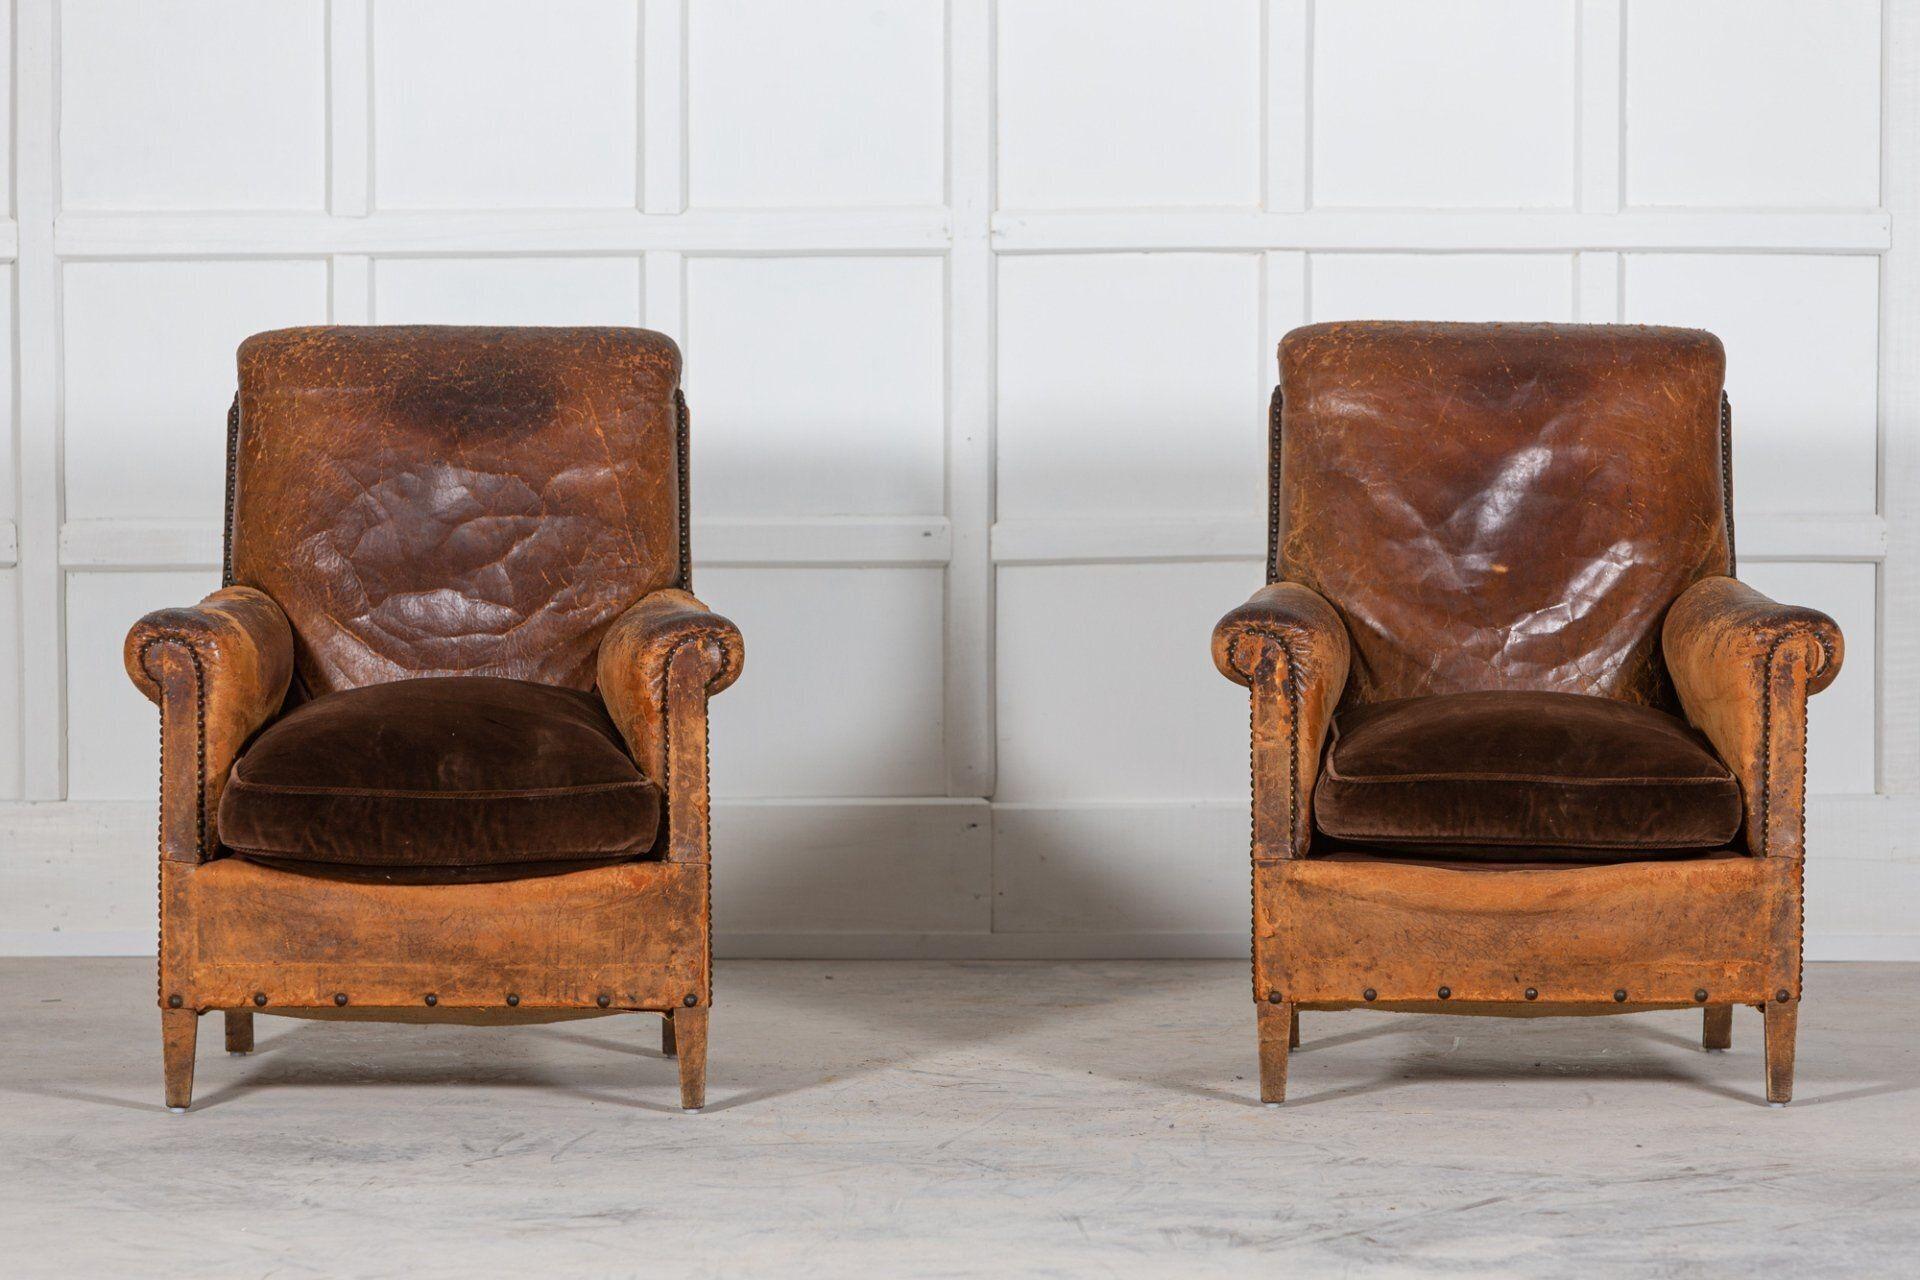 Circa 1920
Pair English worn leather beech club chairs.
Sku 1119
Price for the pair
Measures: W74 x D76 x H90cm.
Seat height 41cm.